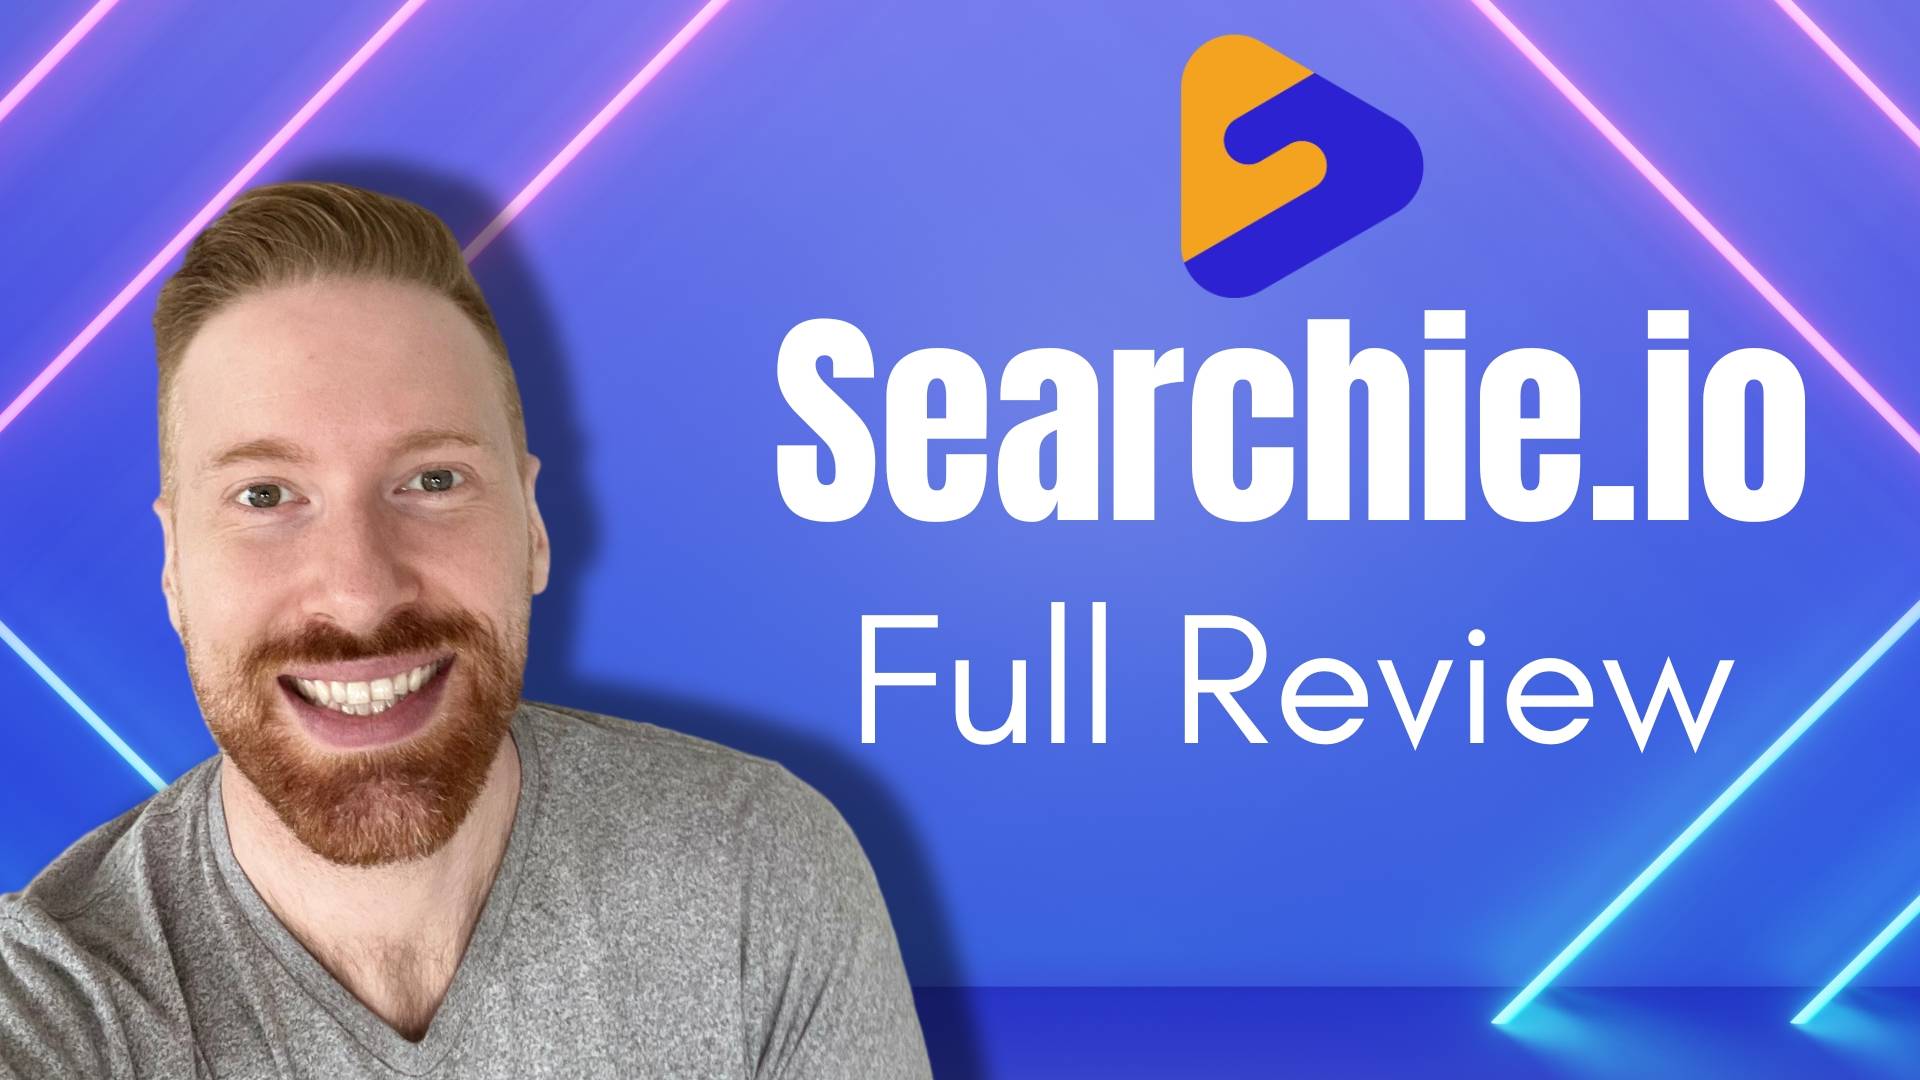 Searchie.io full review